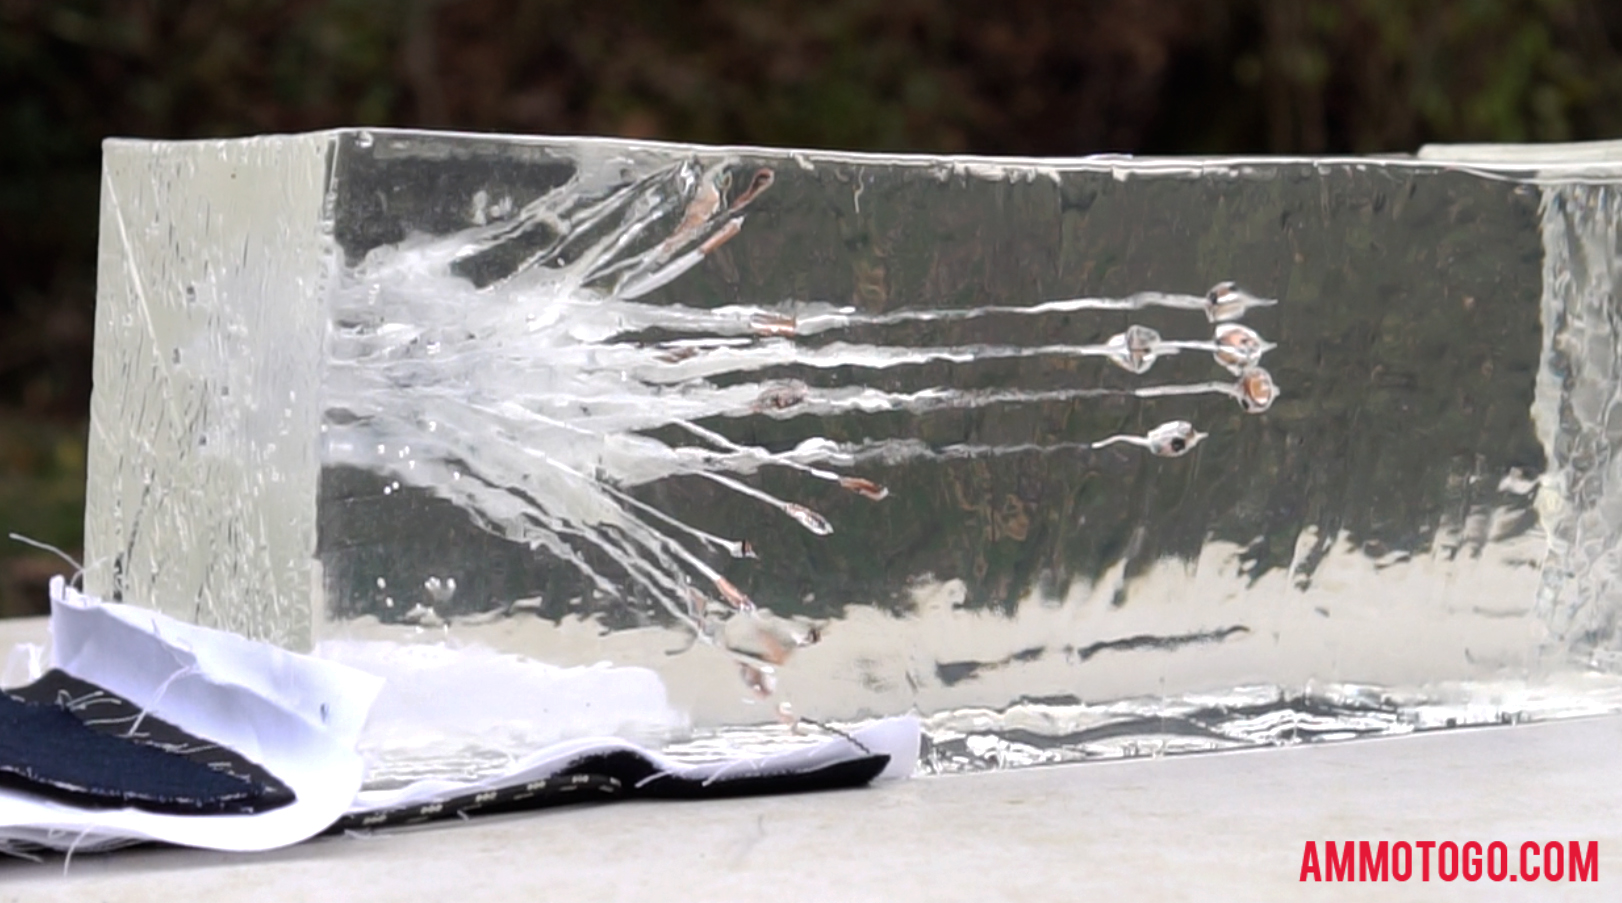 Firing rounds into ballistic gel to determine the best ammo for self-defense